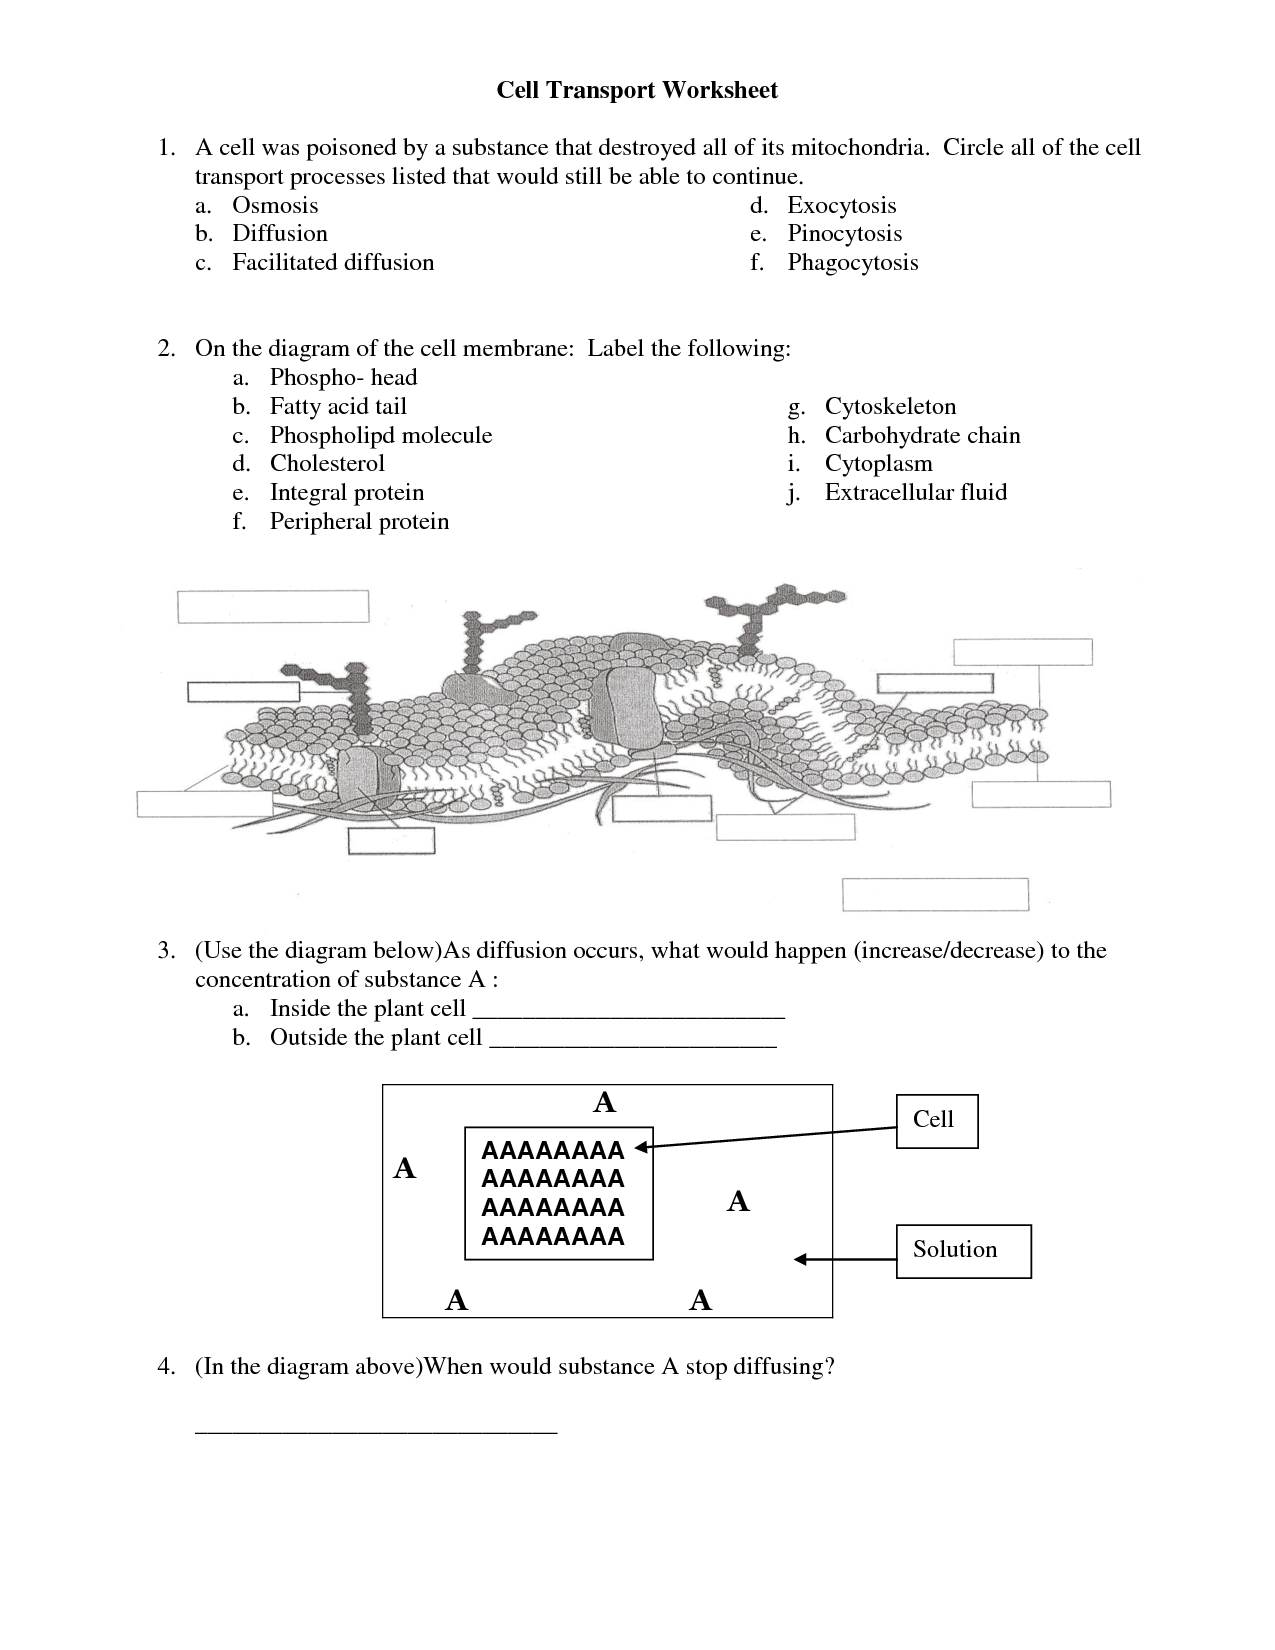 10 Best Images of Cell Membrane Labeling Worksheet - Cell Membrane